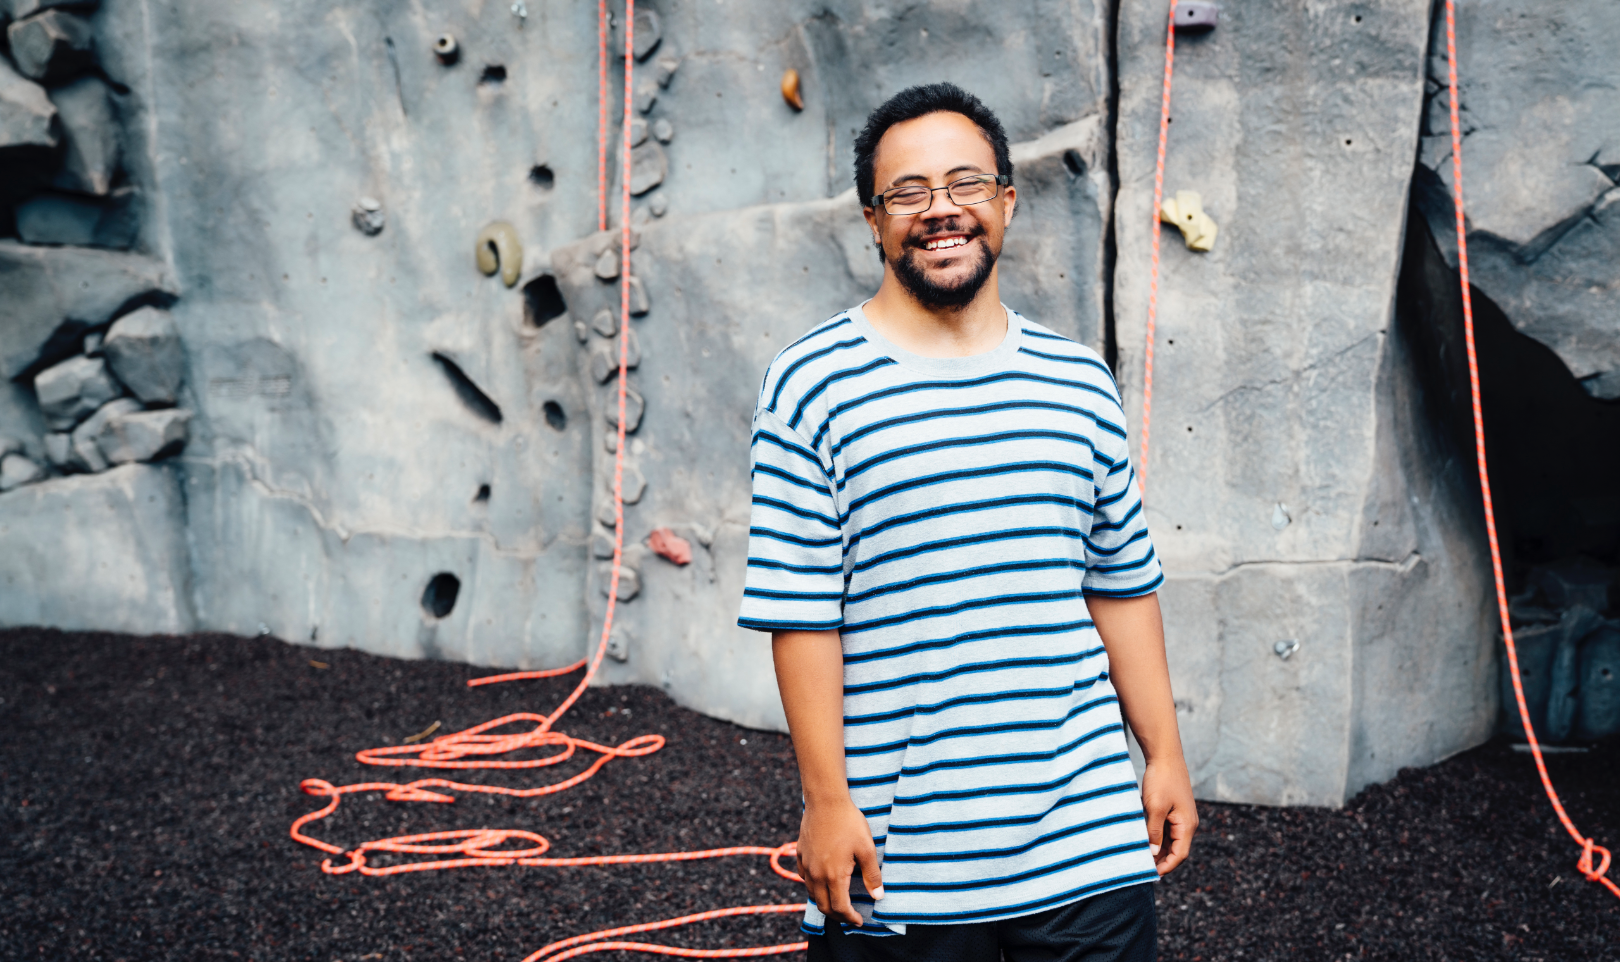 Man standing infront of rock climbing wall smiling